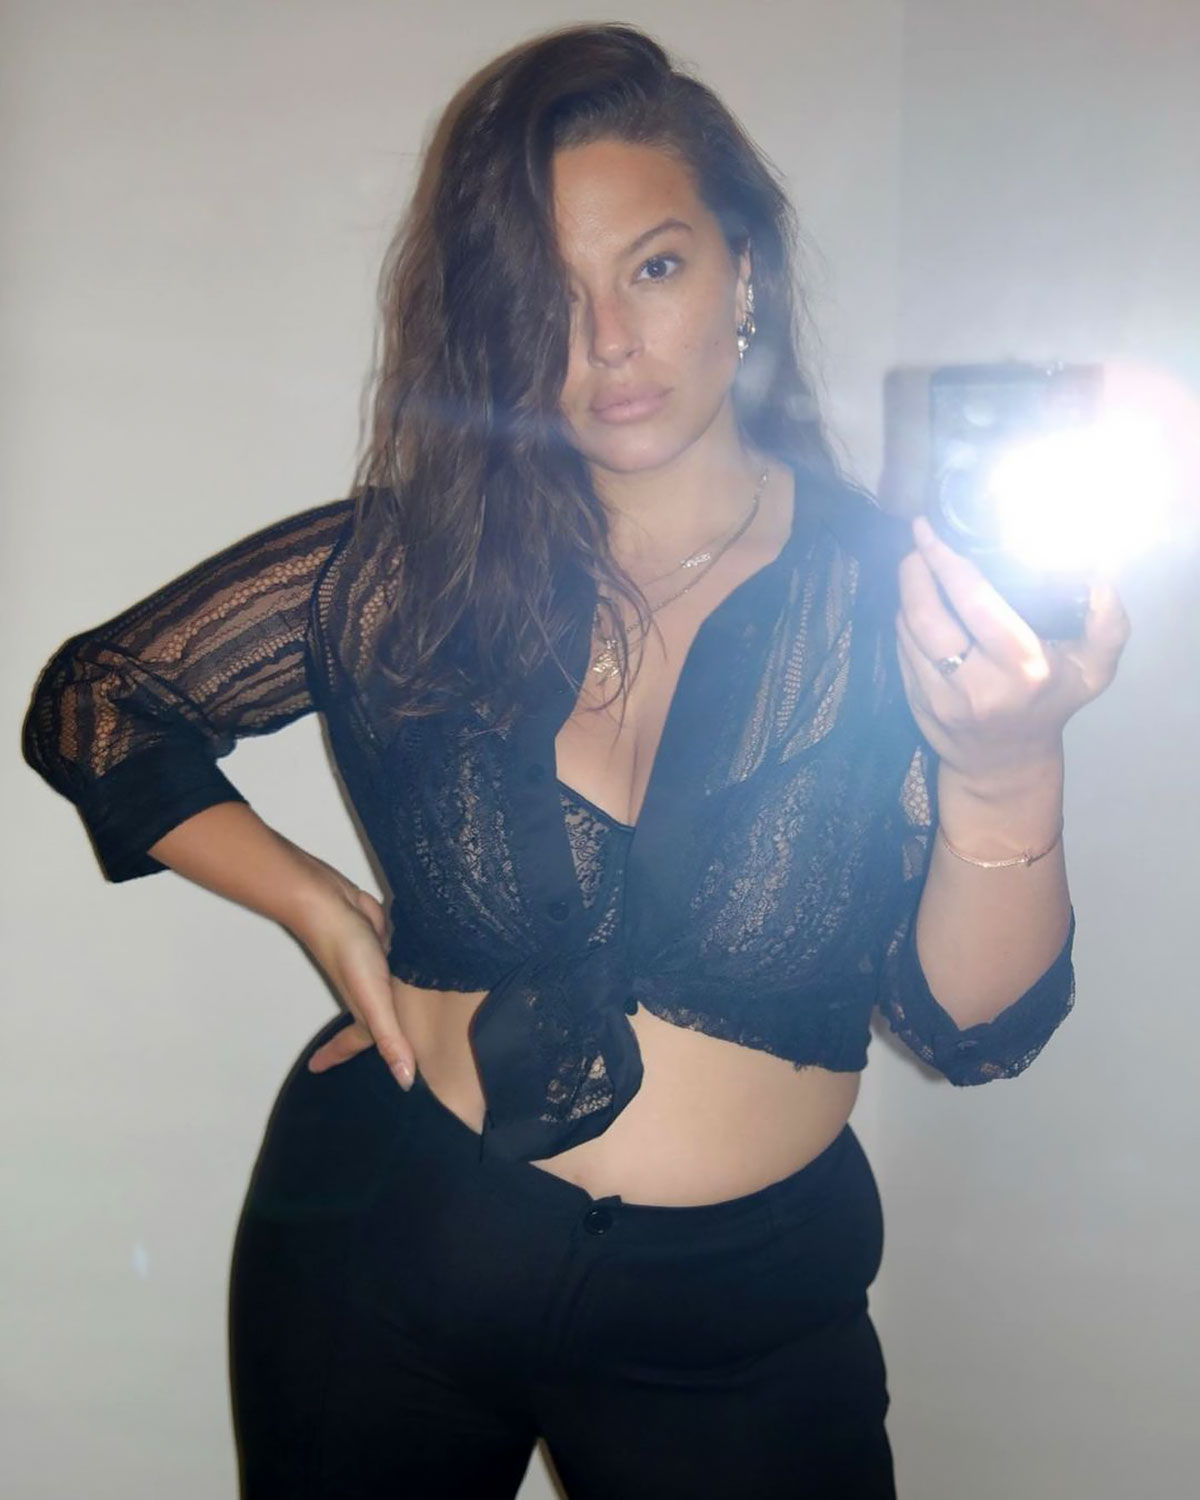 Plus Size Model in Black Bra, Fat Woman with Big Natural Breast on